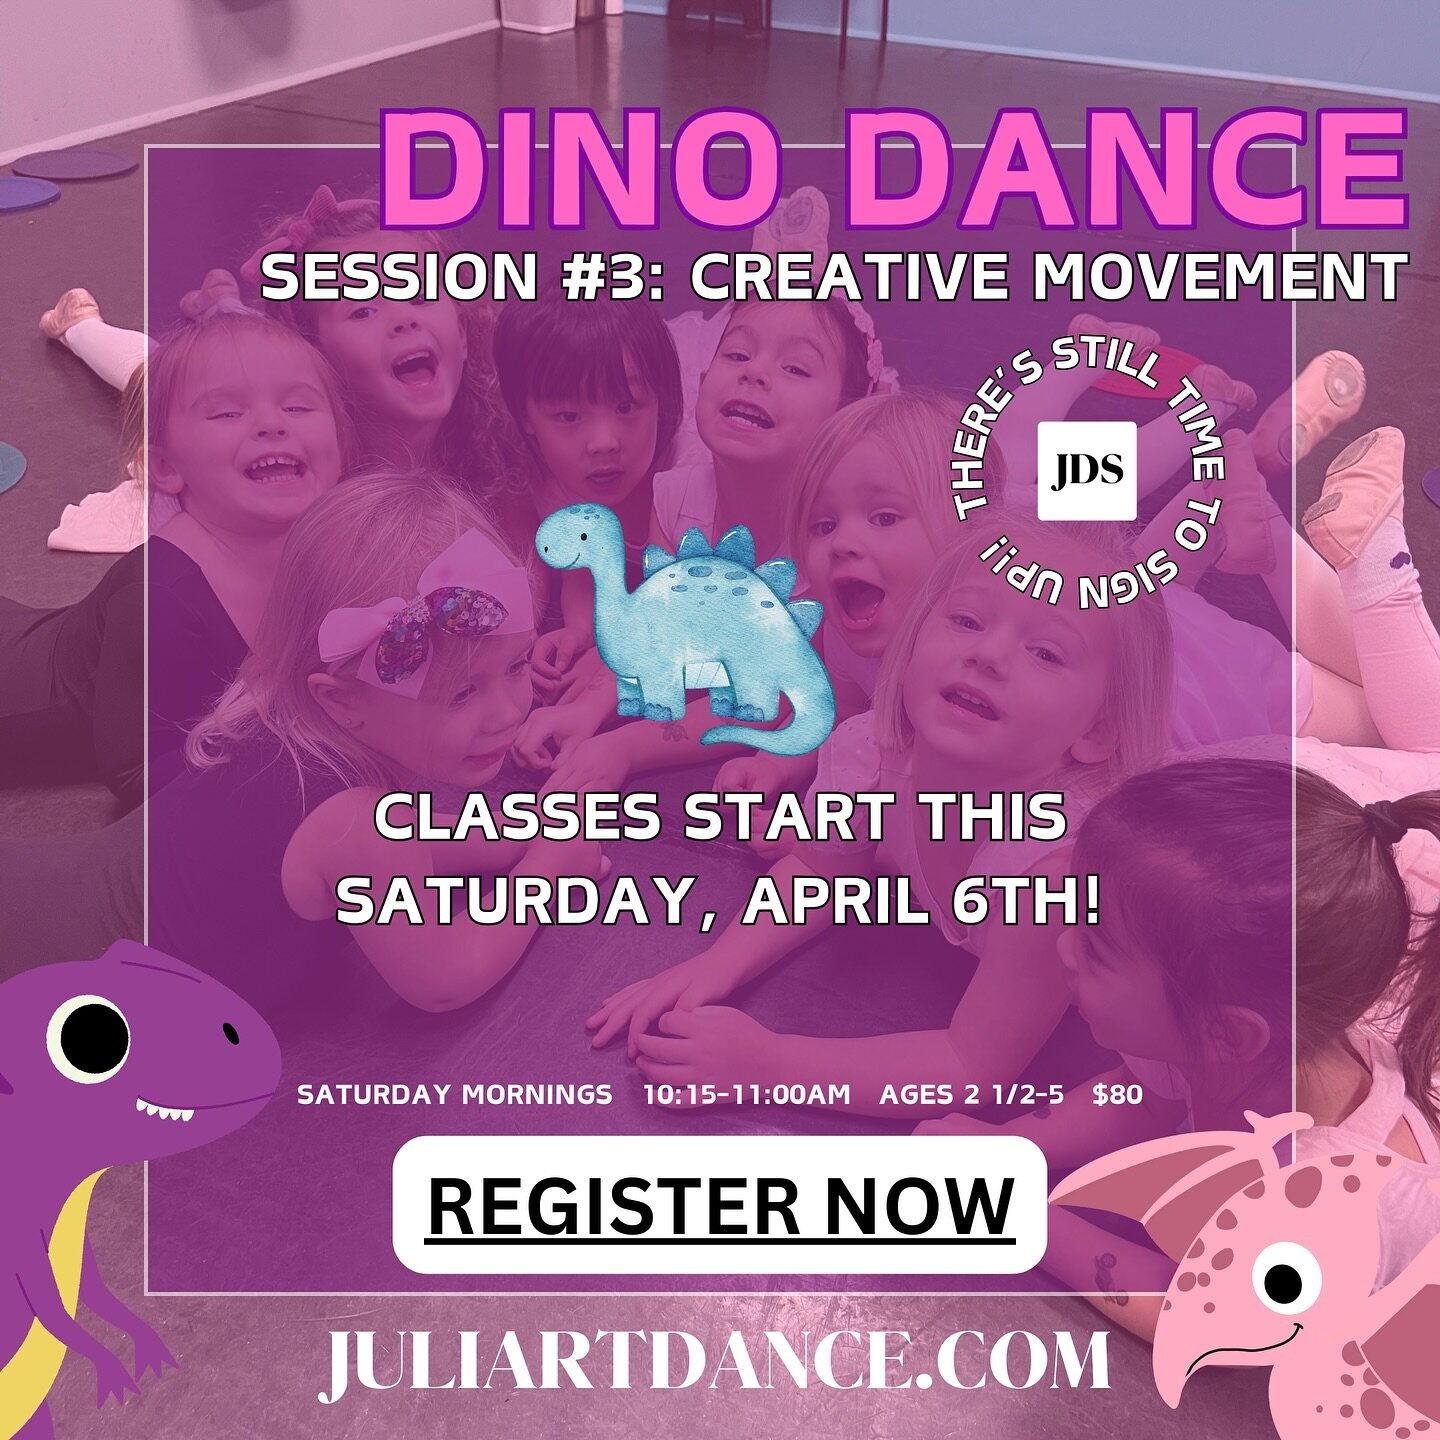 There&rsquo;s still time to sign up for DINO DANCE! Classes start this Saturday, April 6th - REGISTER NOW! 💜🦕💗

juliartdance.com
&bull;
&bull;
&bull;
#juliartdancestudio #juliartdance #dinodancecamp #creativemovement #kidsdanceclass #danceclassesi